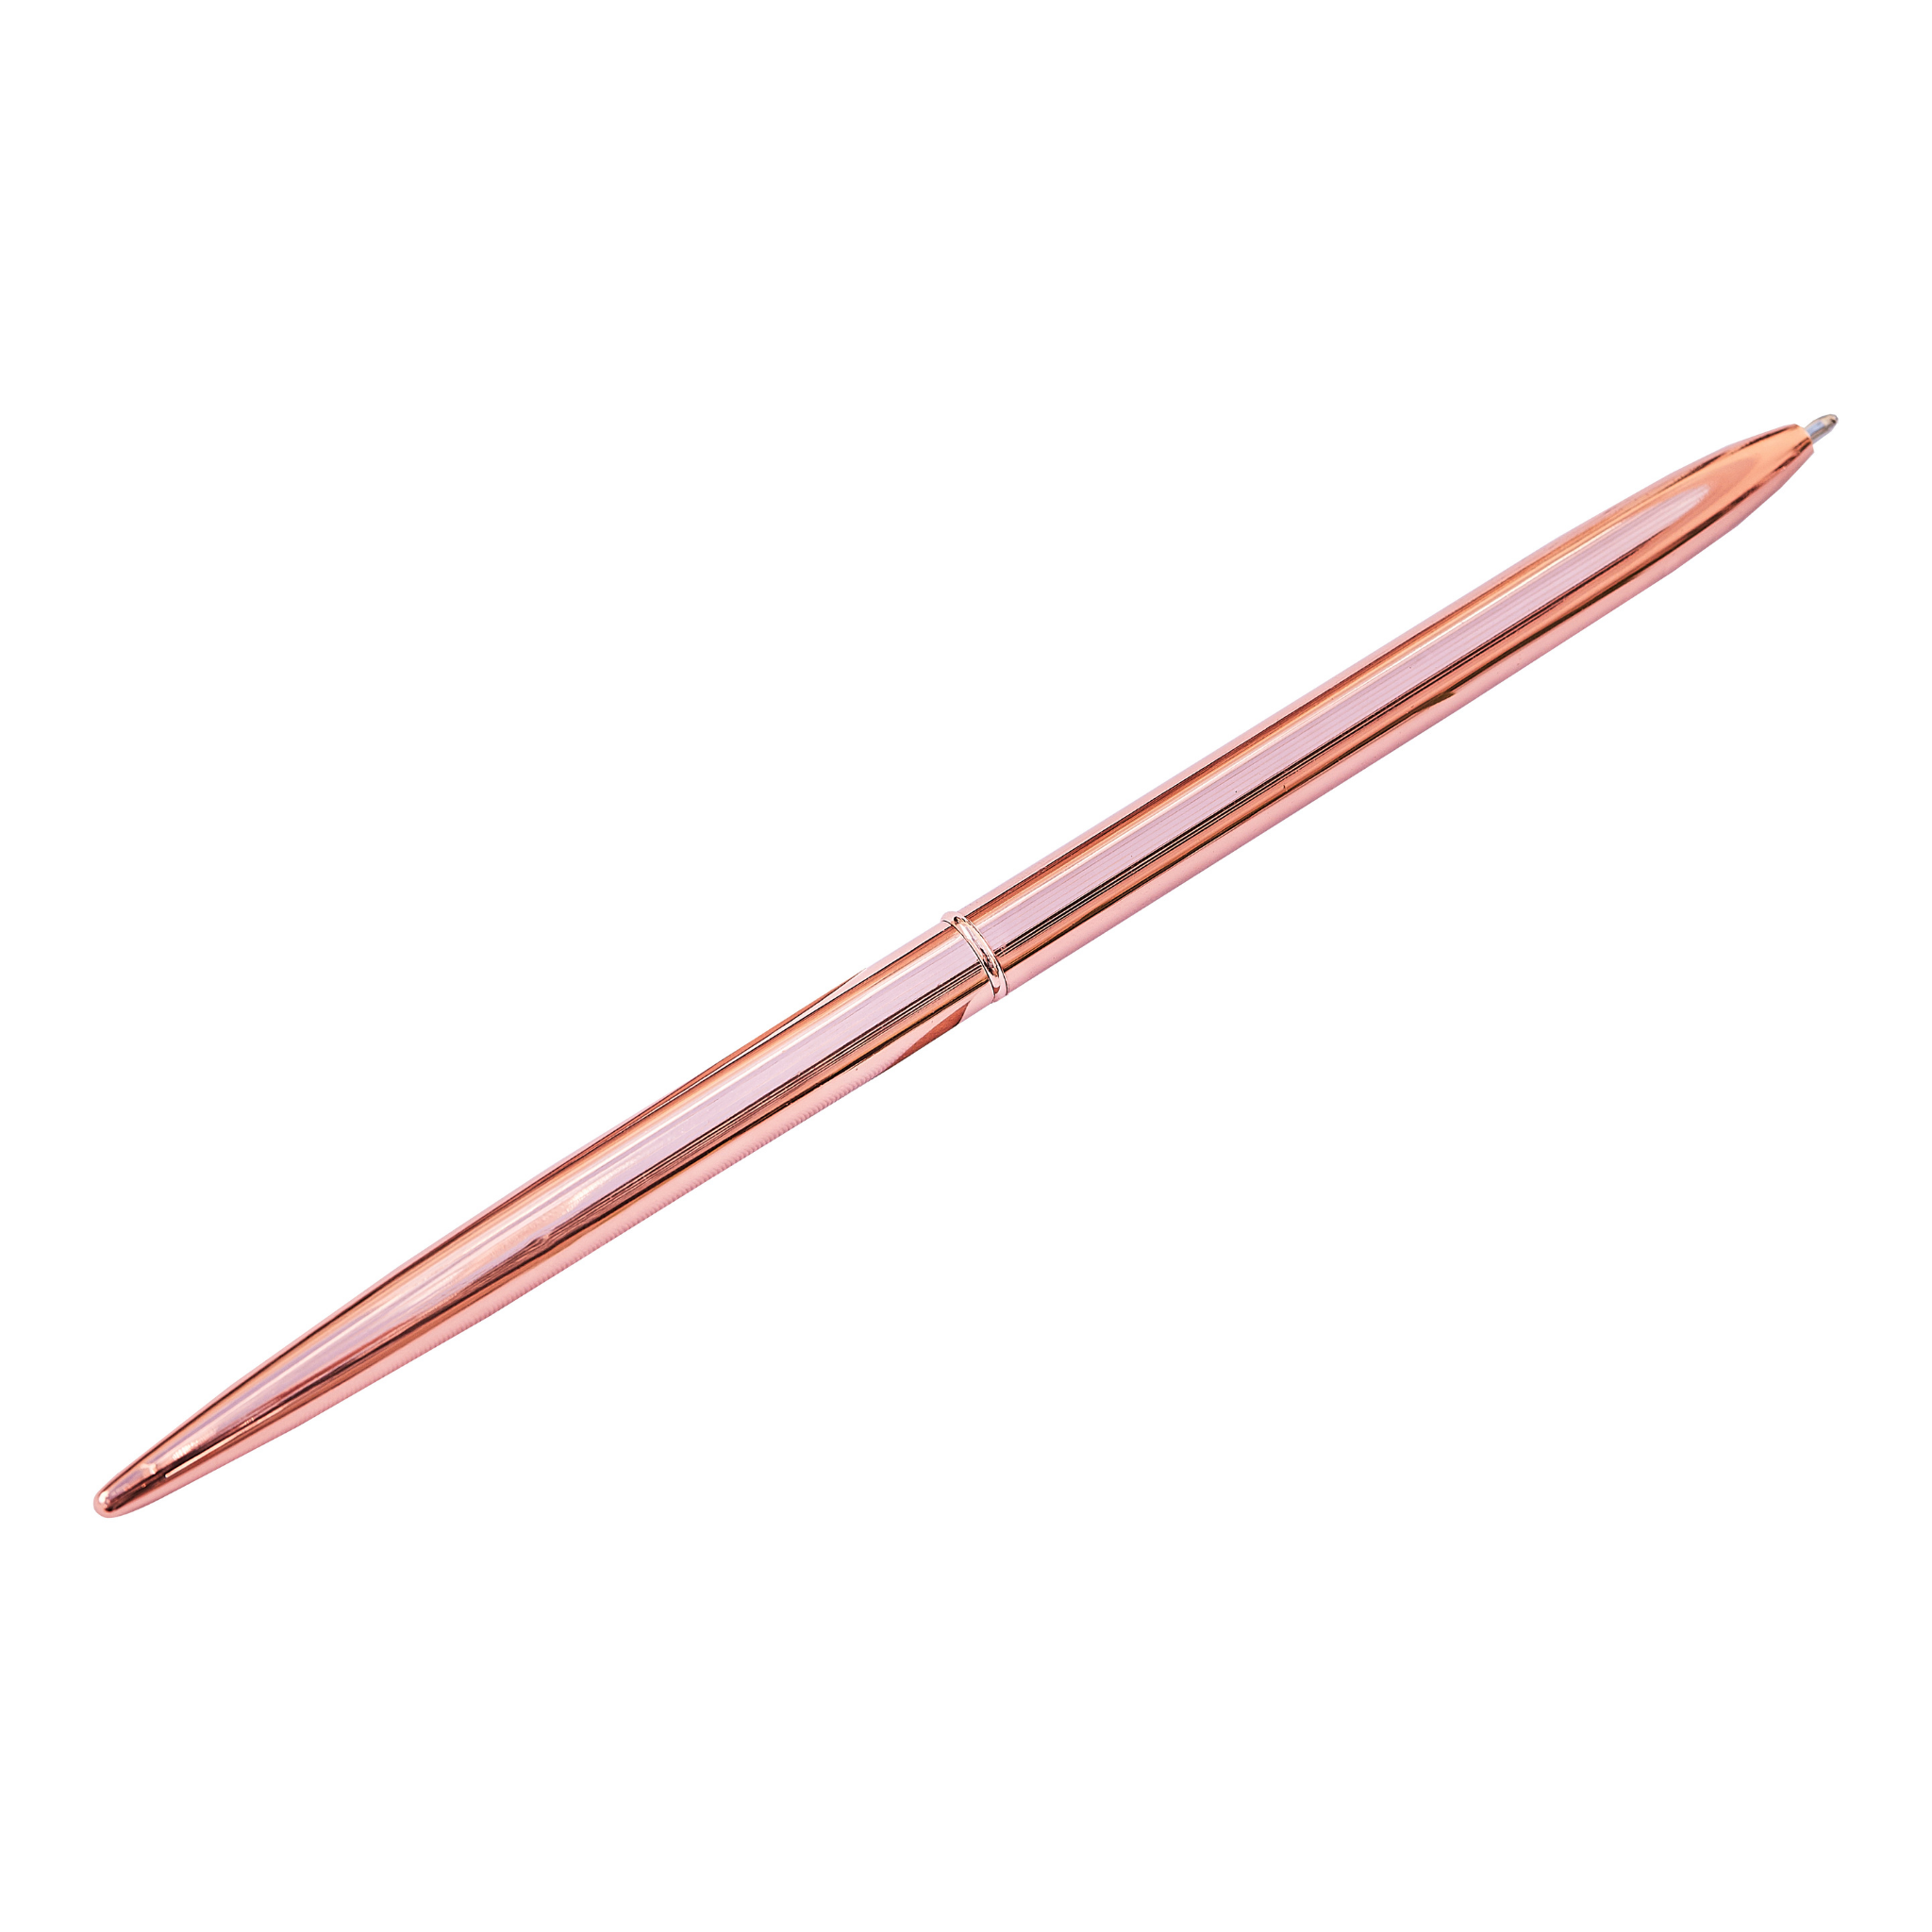 Rose Gold pen, black ink. Ideal for adding a touch of style to your wedding guestbook. Available at weddingworx.ie